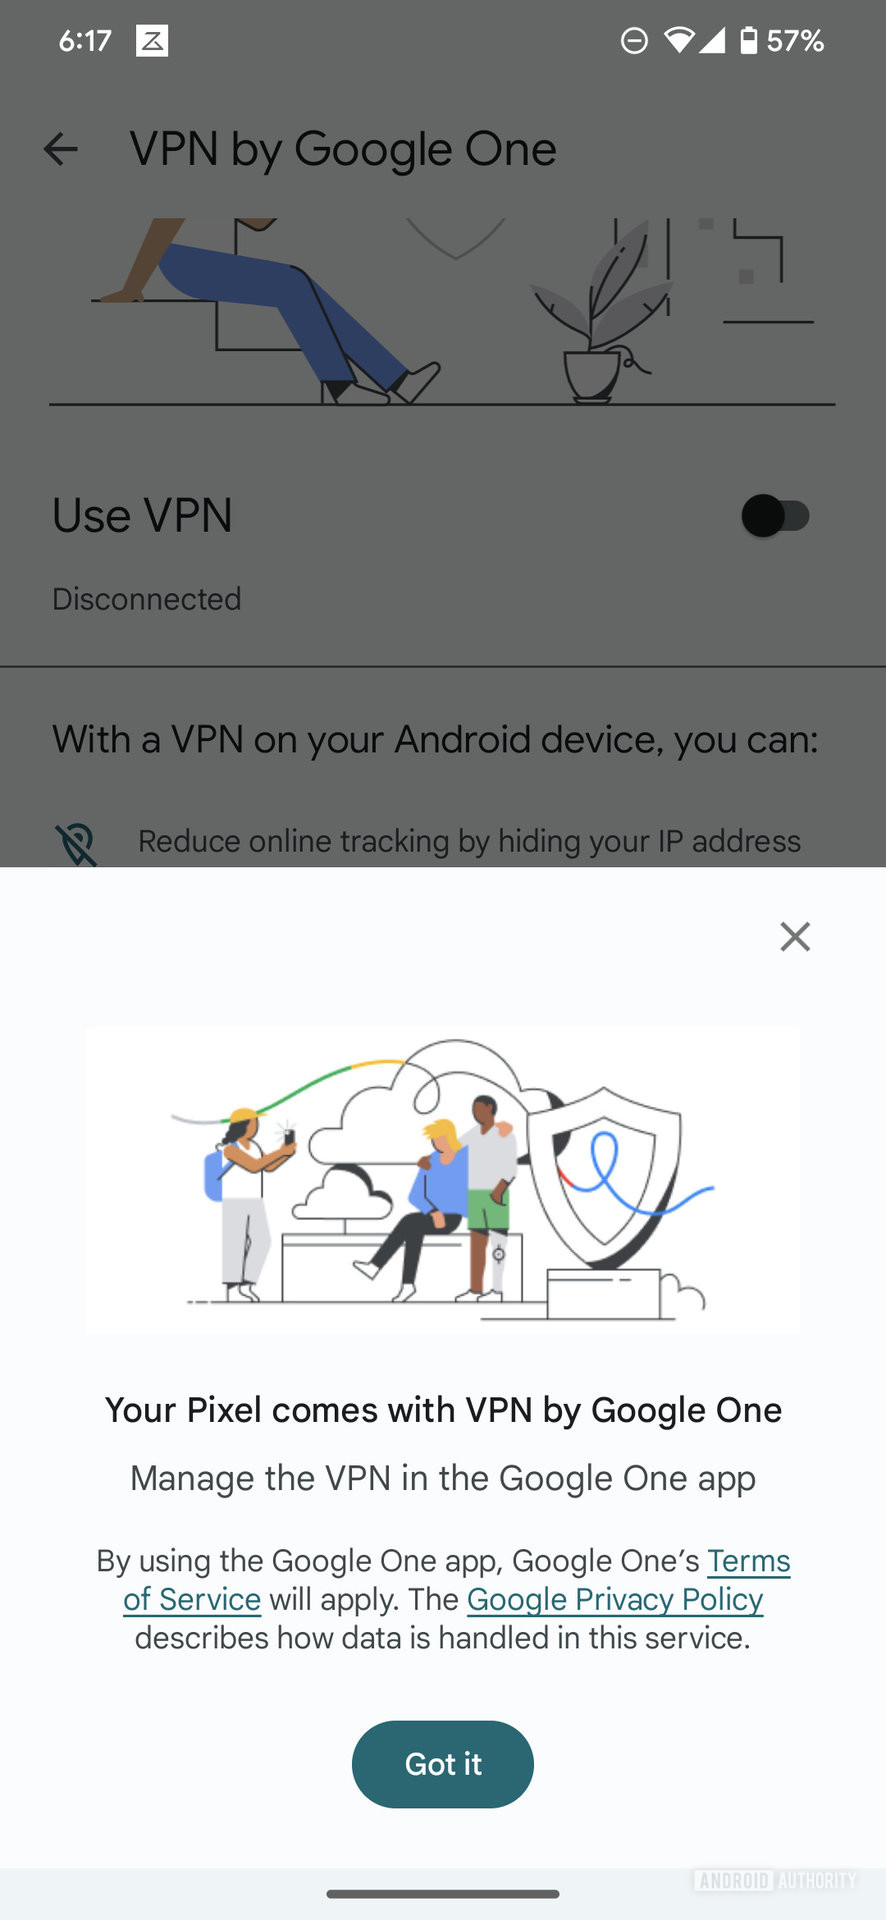 A screenshot of the Google One VPN interface showing the landing page upon launching the app.